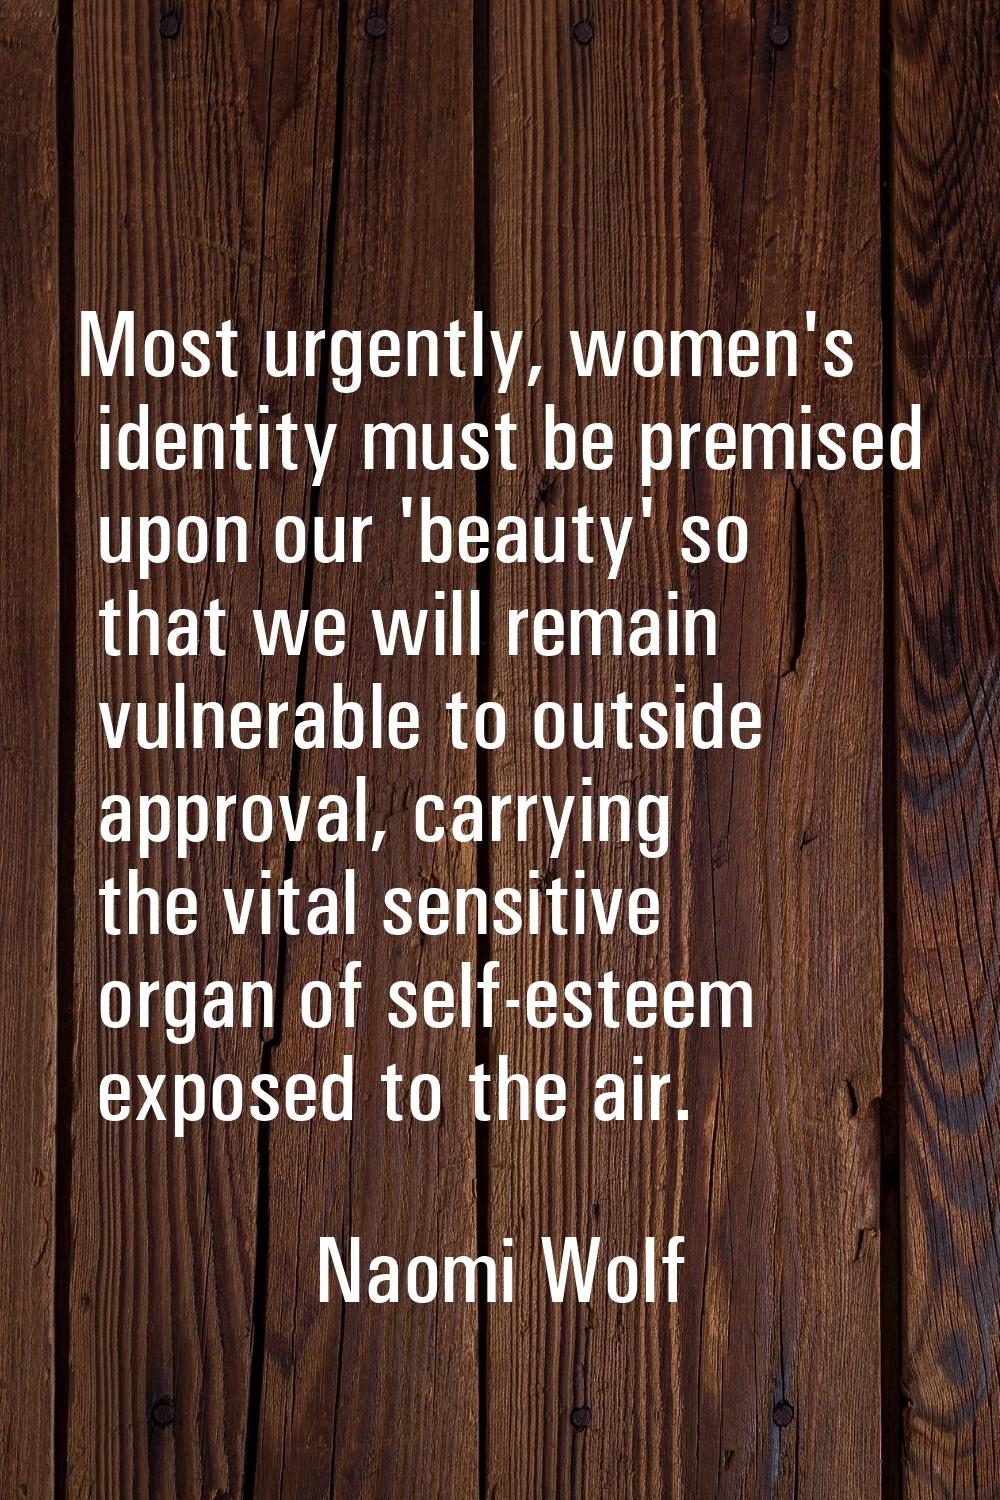 Most urgently, women's identity must be premised upon our 'beauty' so that we will remain vulnerabl